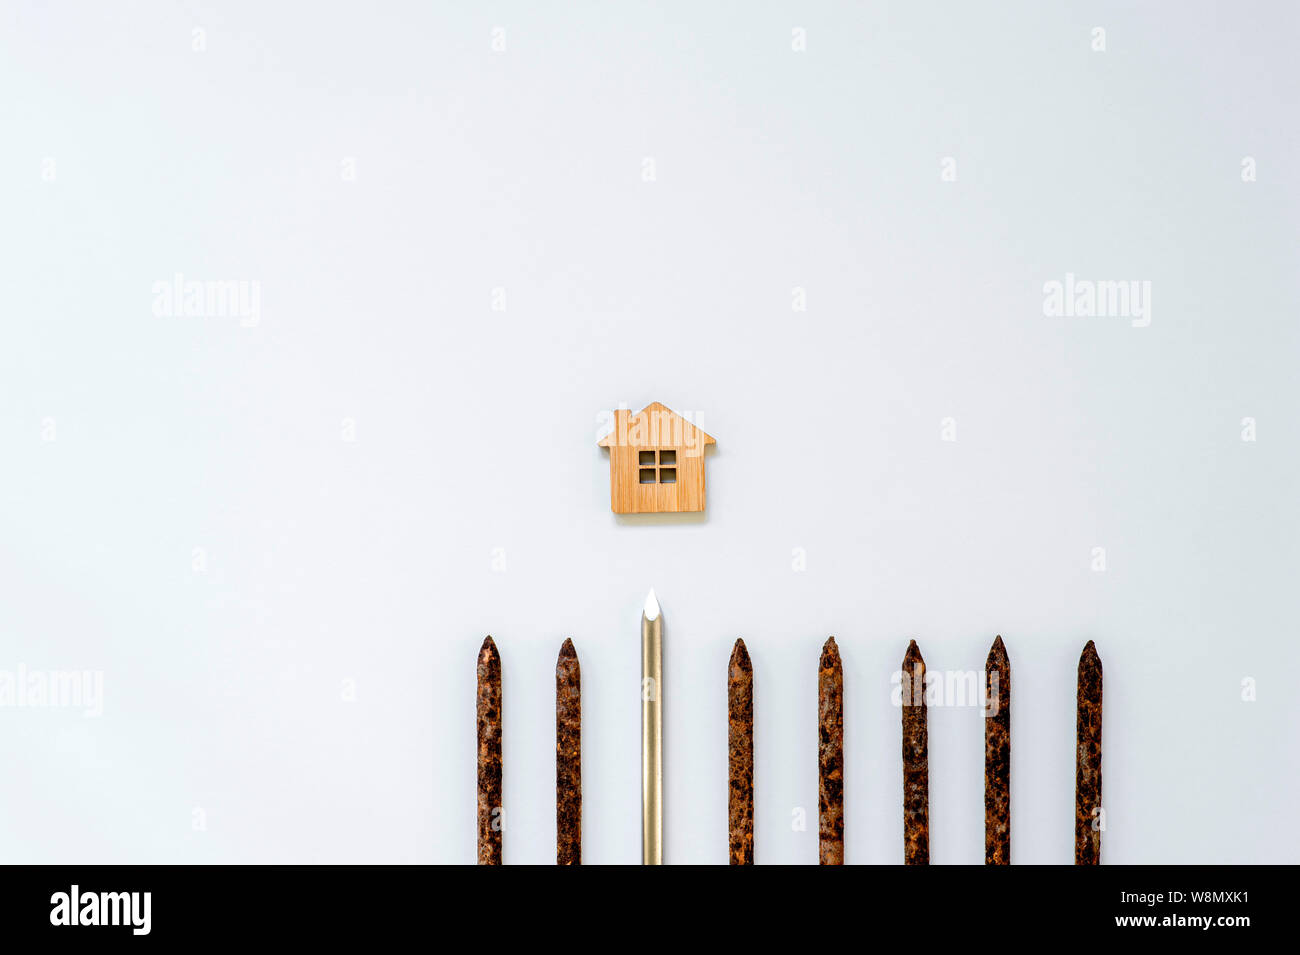 A shiny metal nail stands out in a row of old rusty nails and is aimed at the house symbol on a light background. Stock Photo